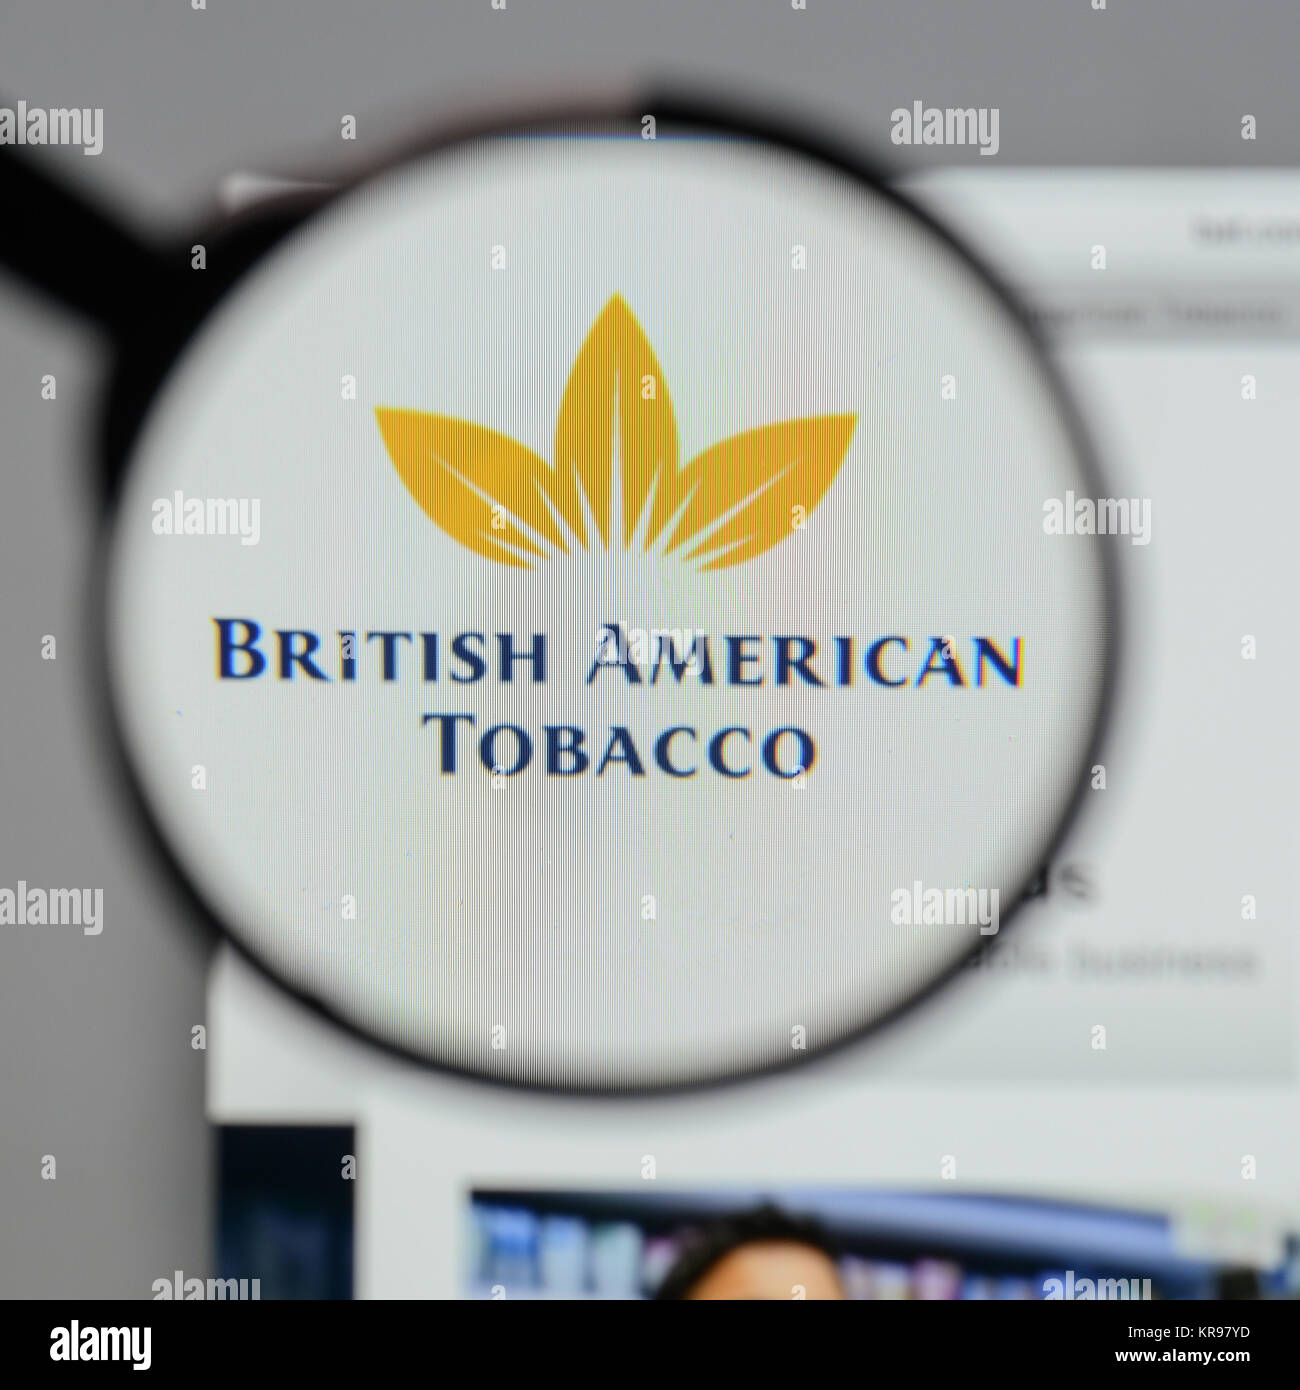 Milan, Italy - August 10, 2017: British American Tobacco  logo on the website homepage. Stock Photo